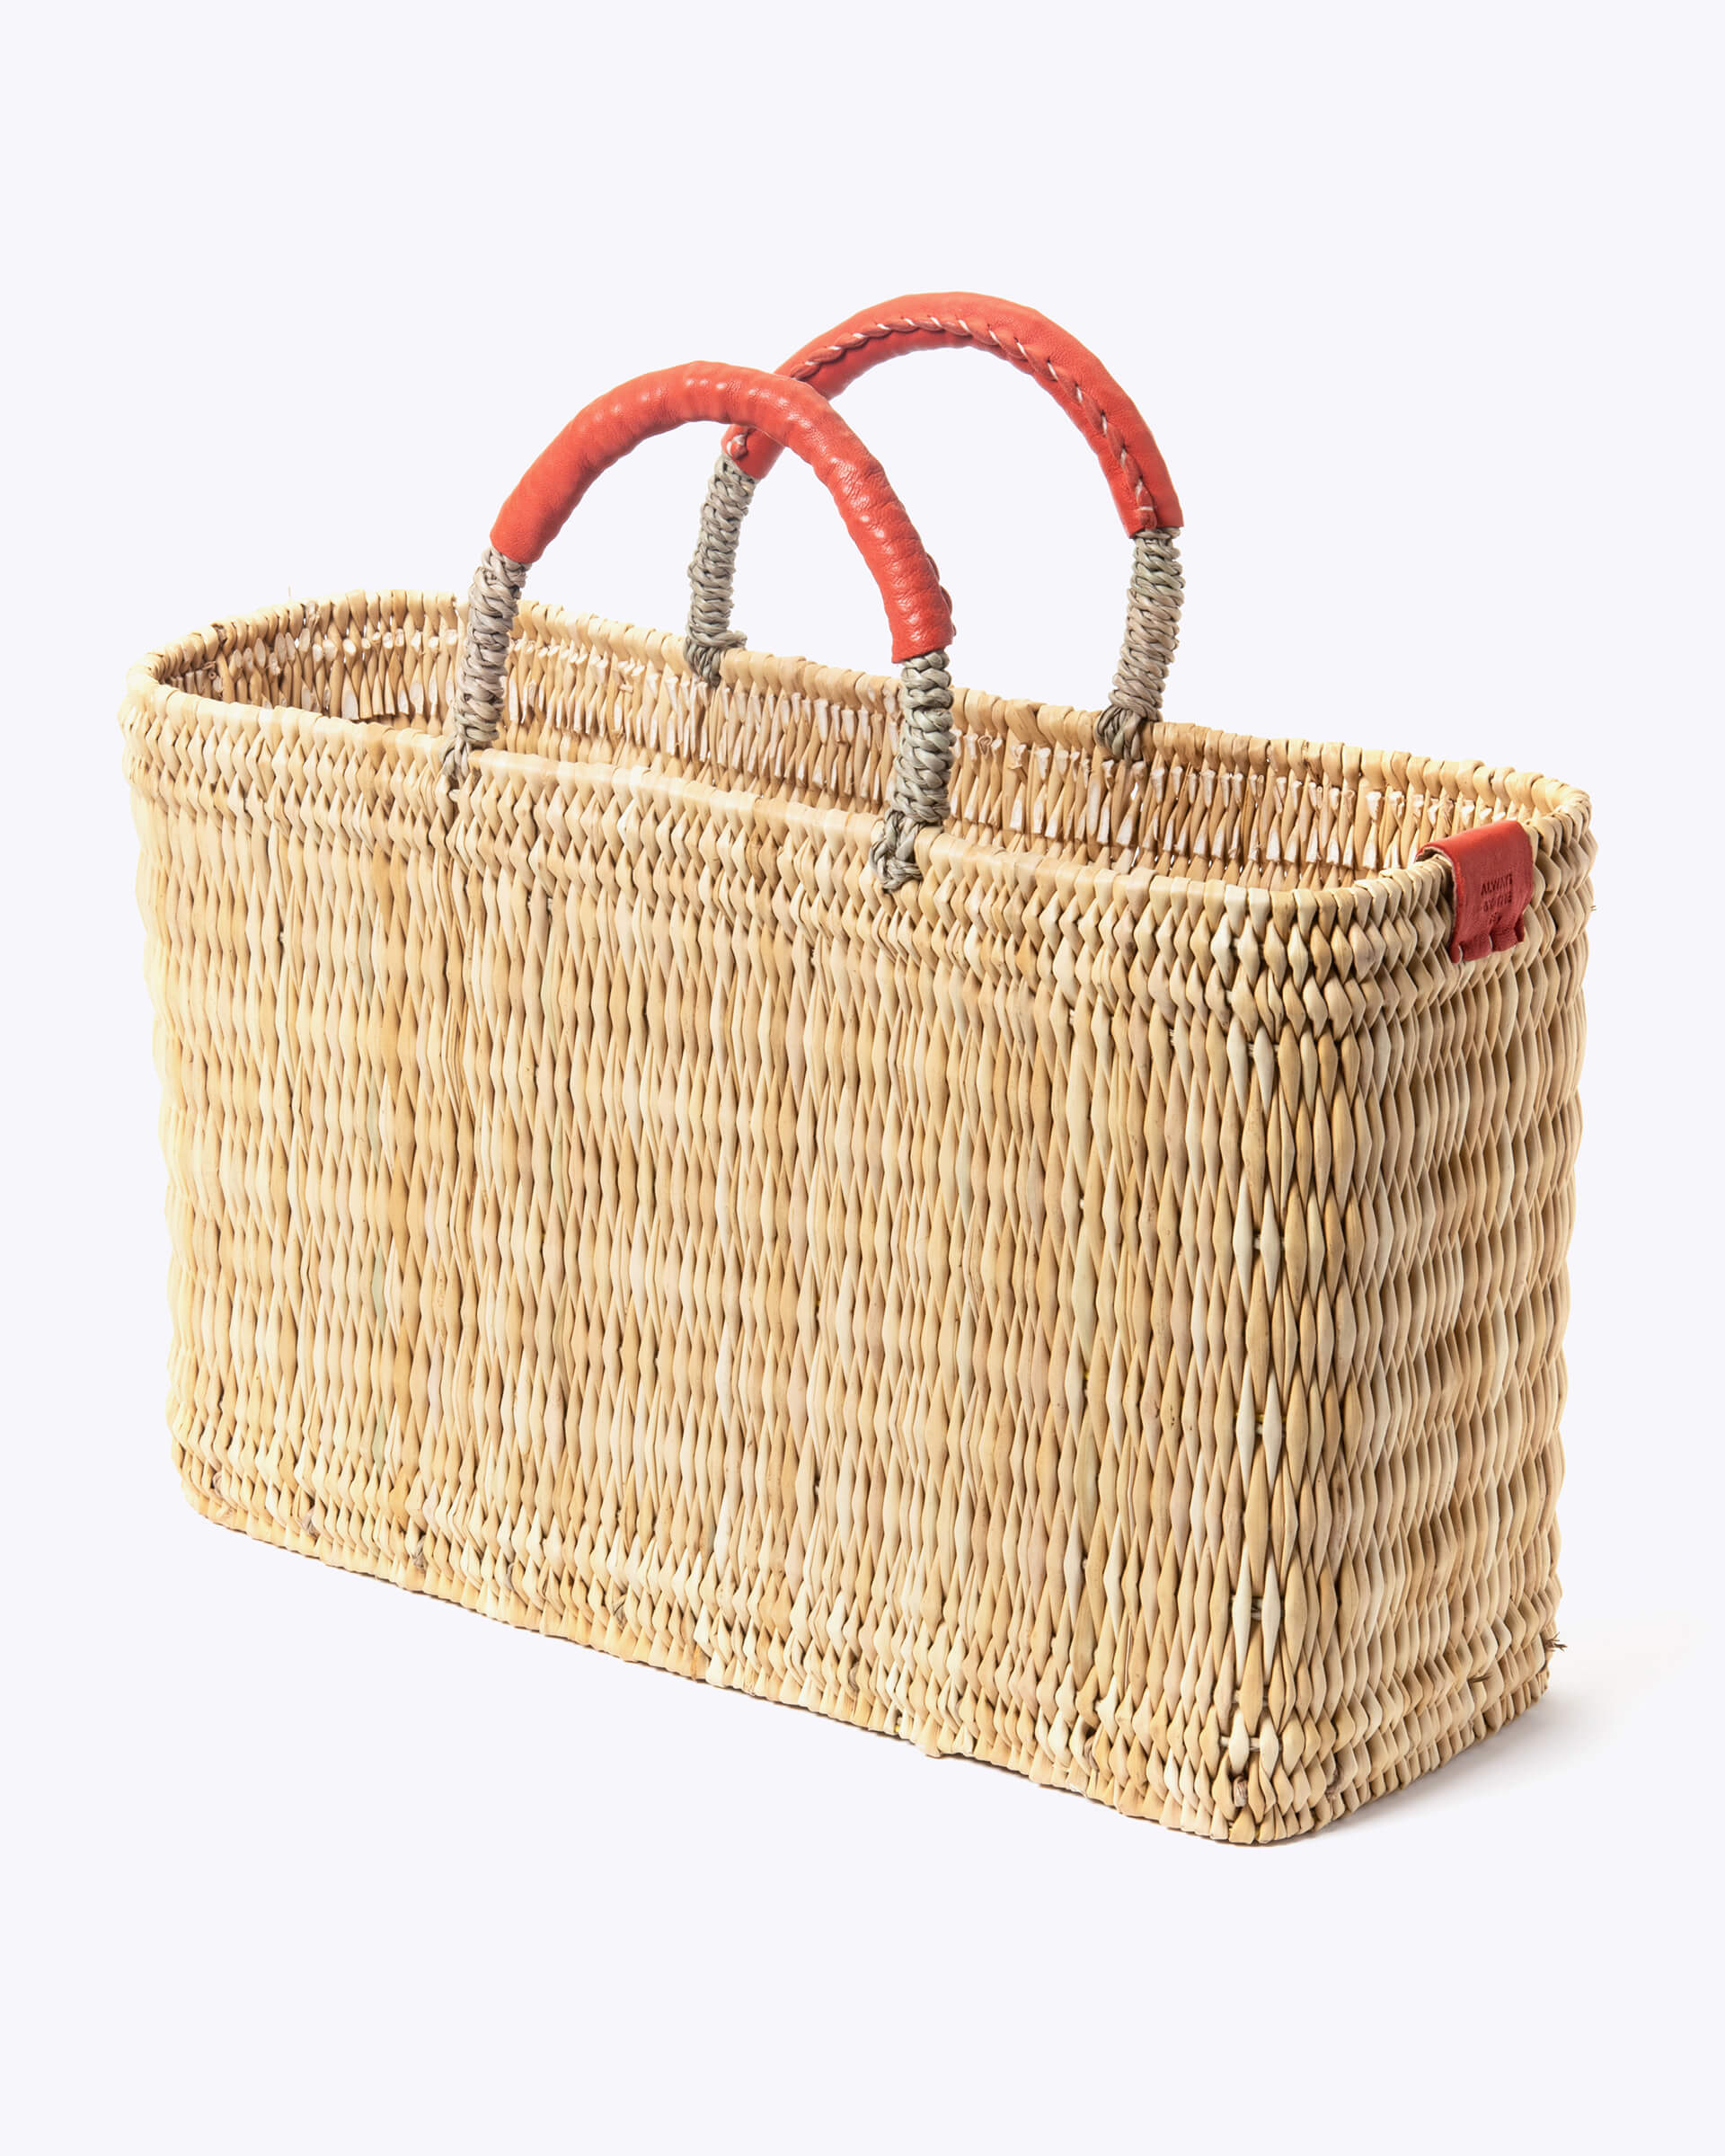 medium straw basket wrapped with orange leather handle on a white background at an angle